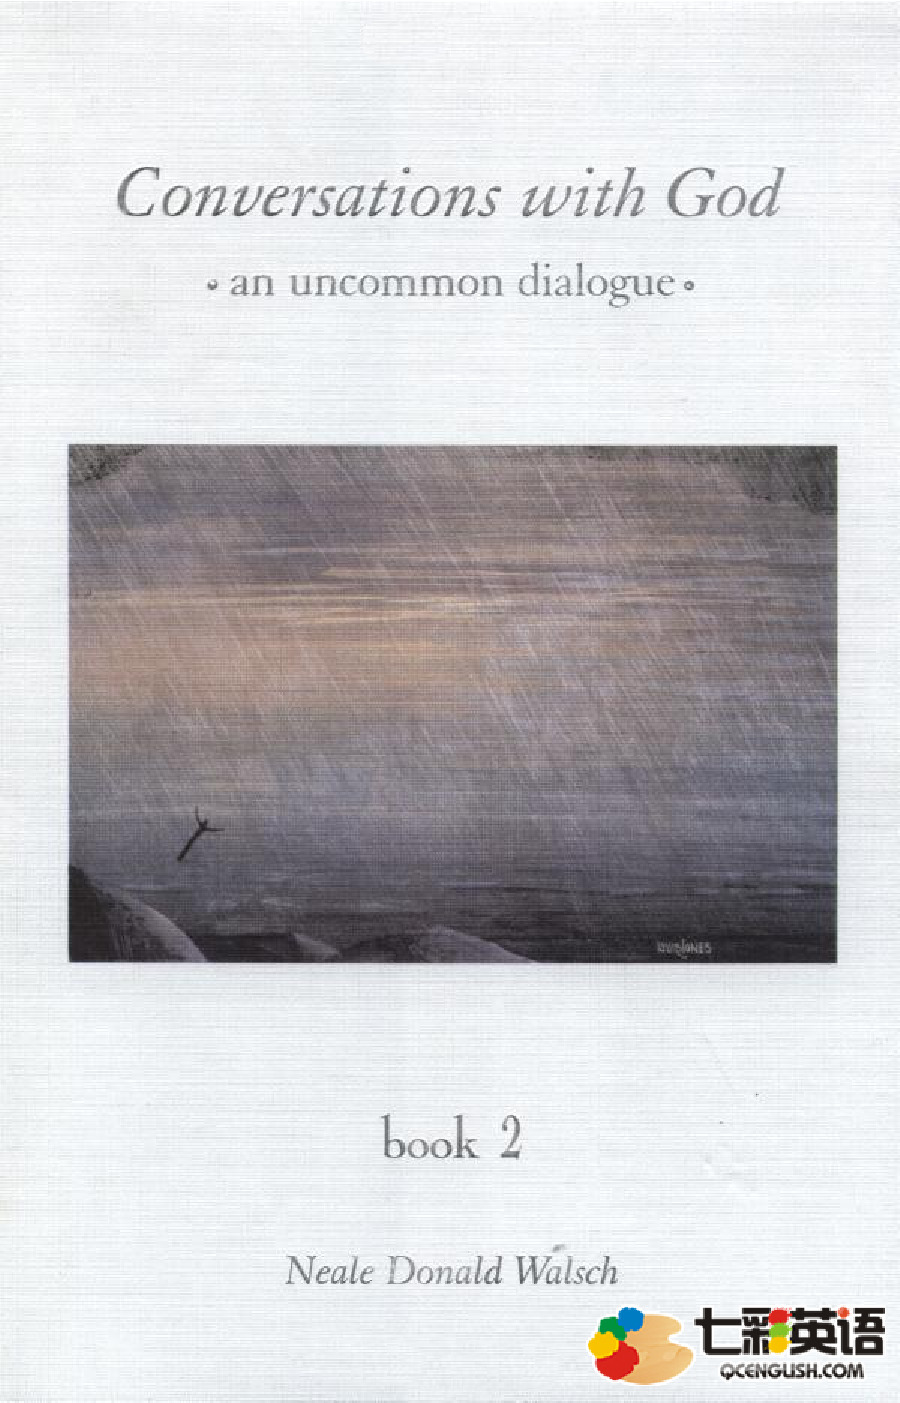 Conversations With God An Uncommon Dialogue (Book 2) – Neale Donald Walsch